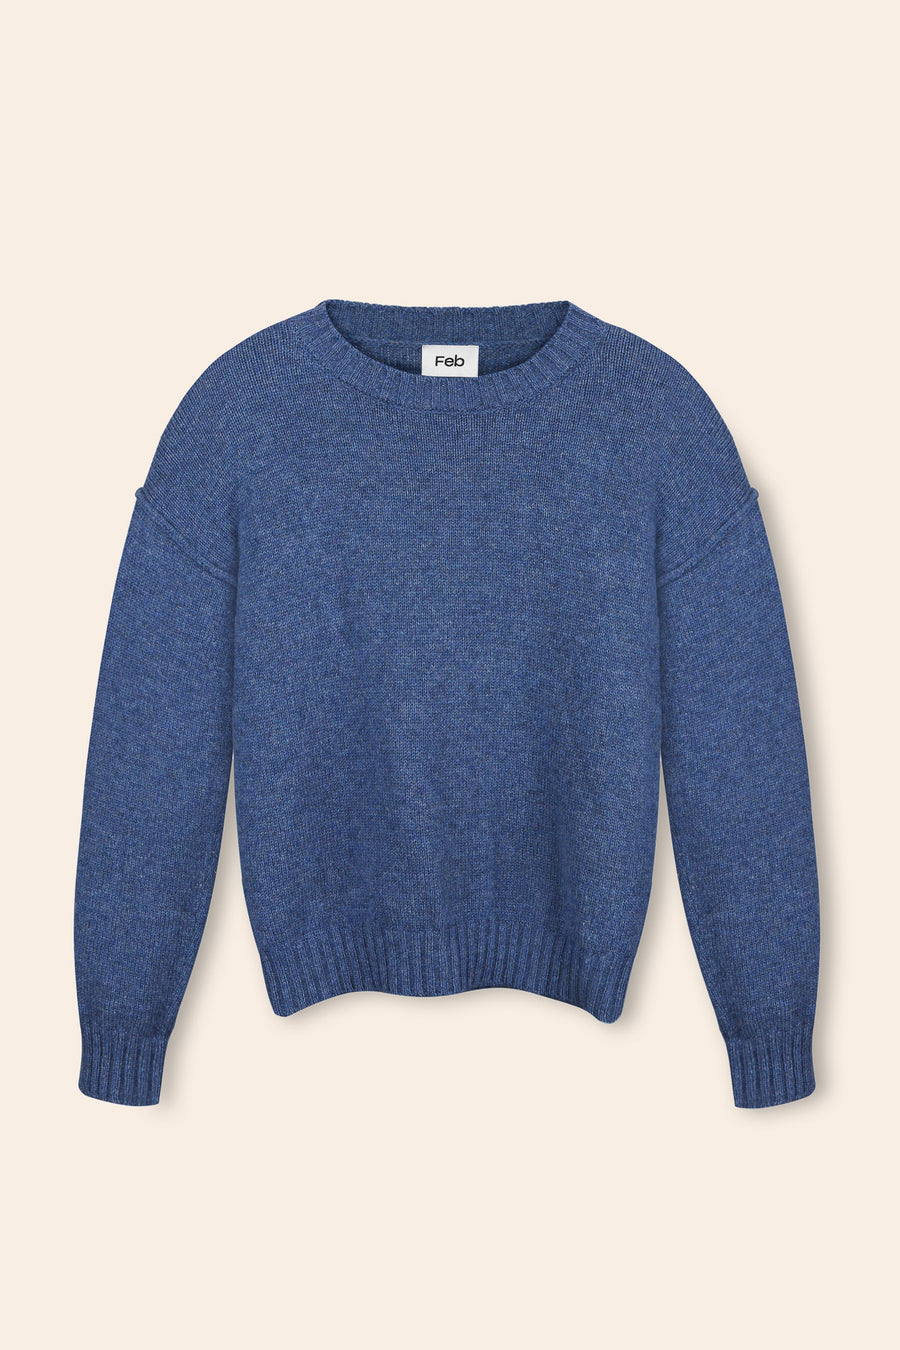 Blue Jeans Sweater